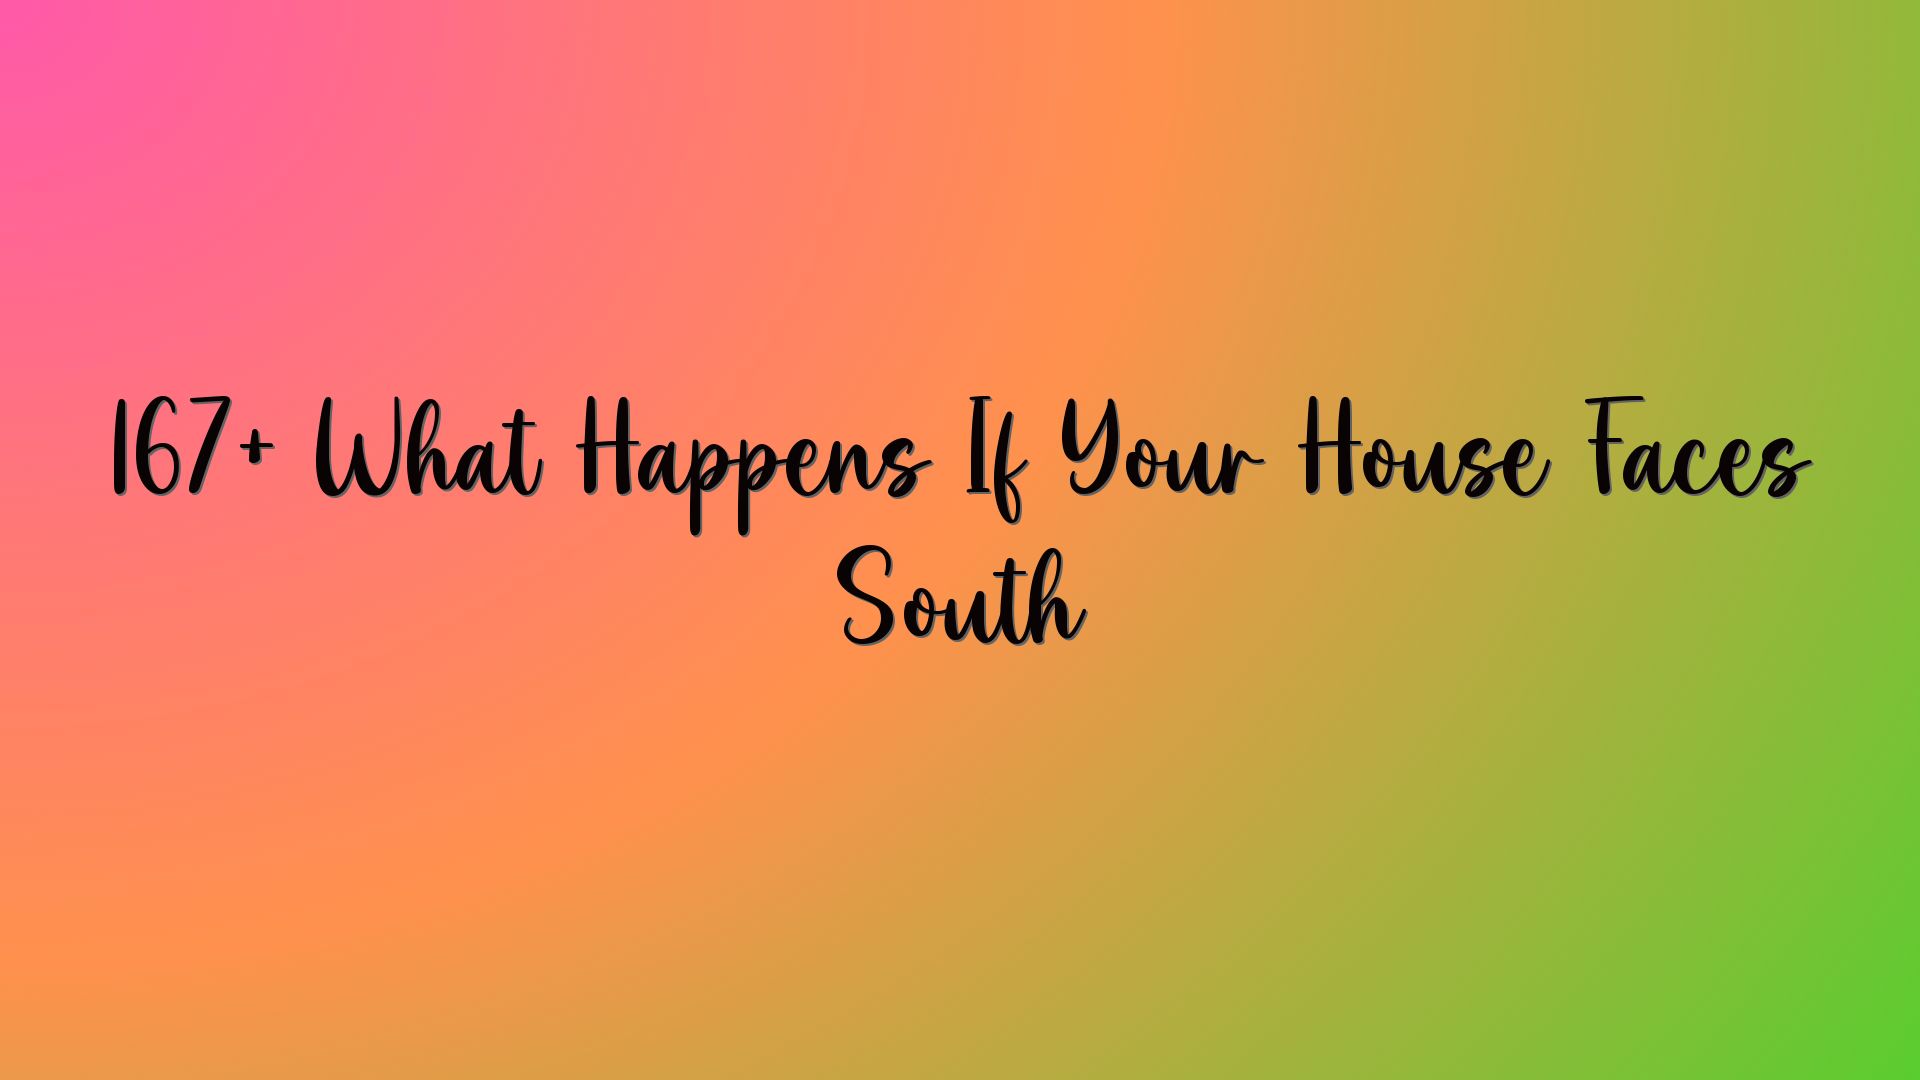 167+ What Happens If Your House Faces South